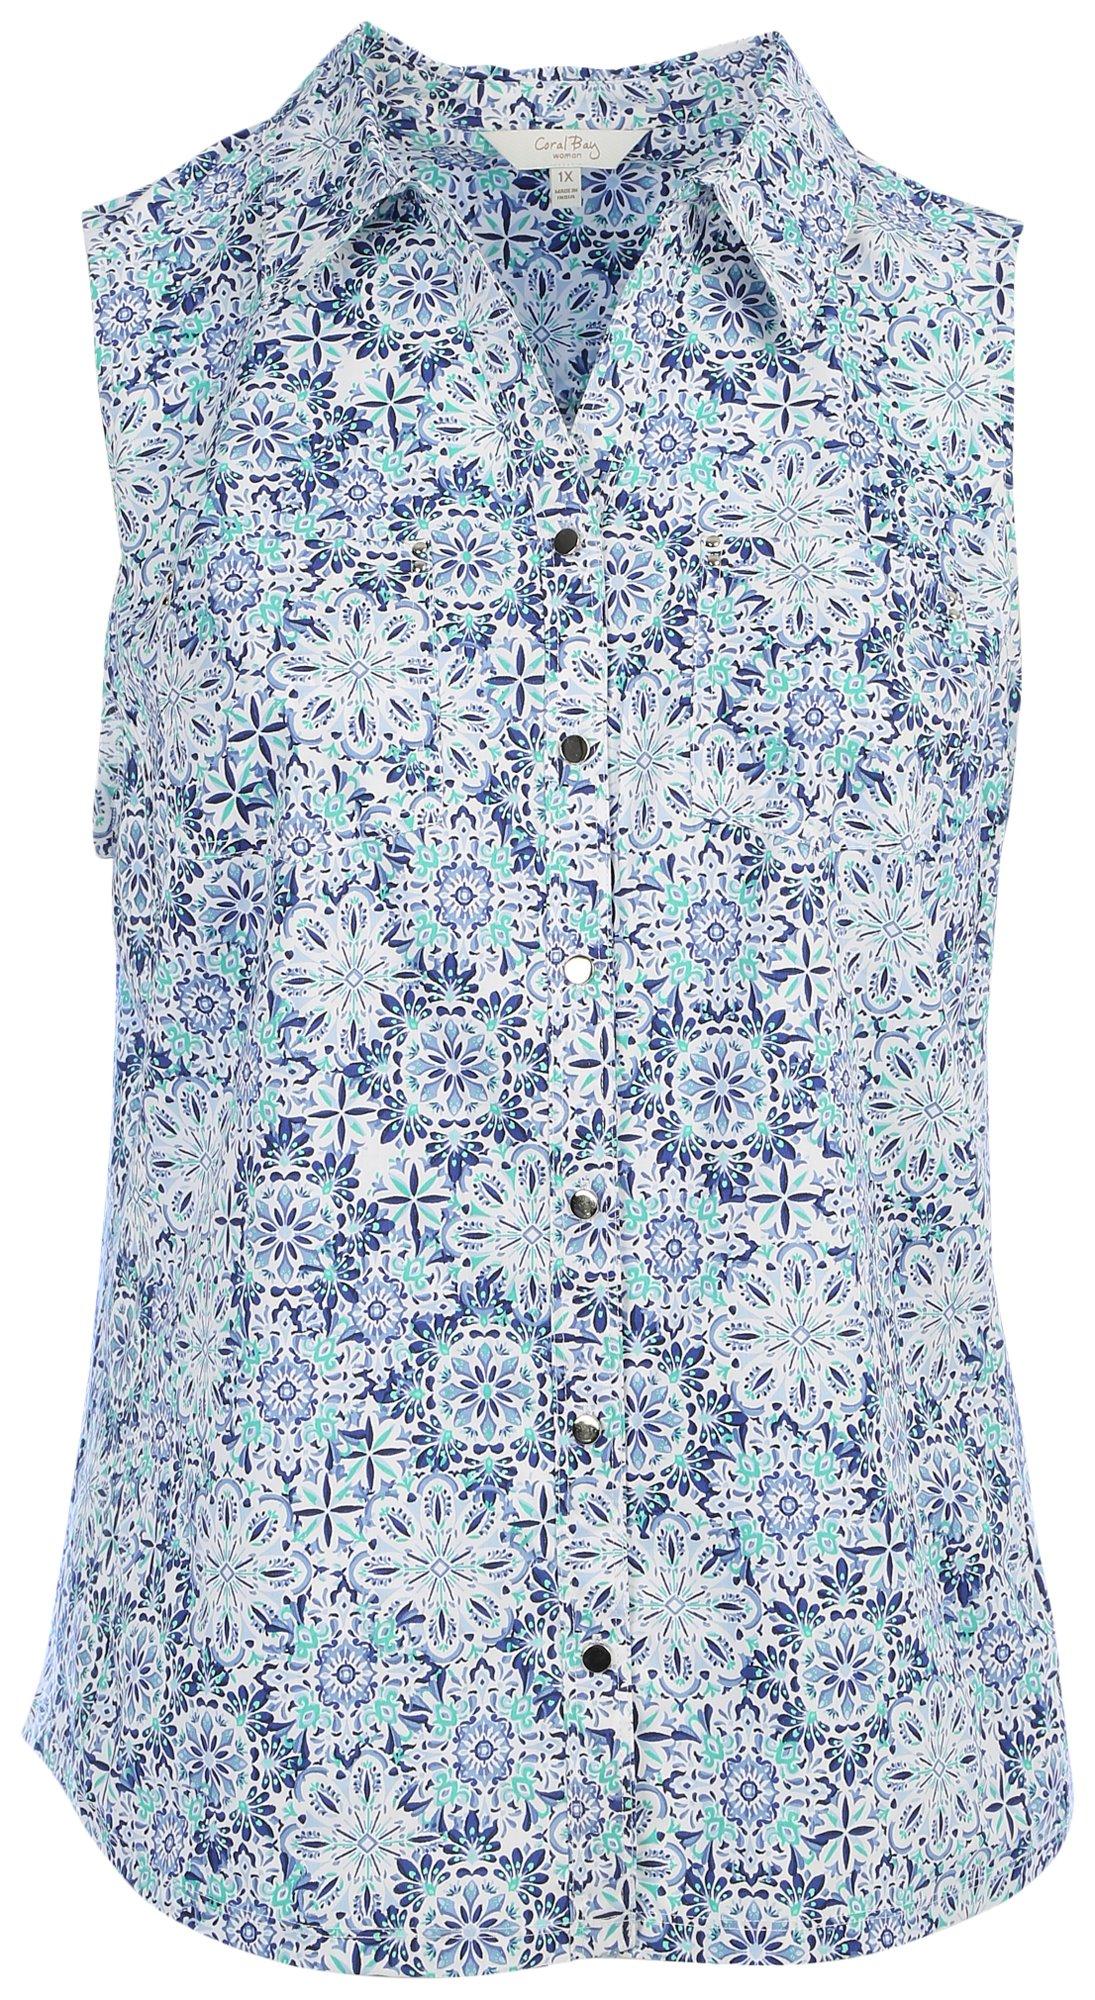 Plus Print Knit To Fit Sleeveless Top